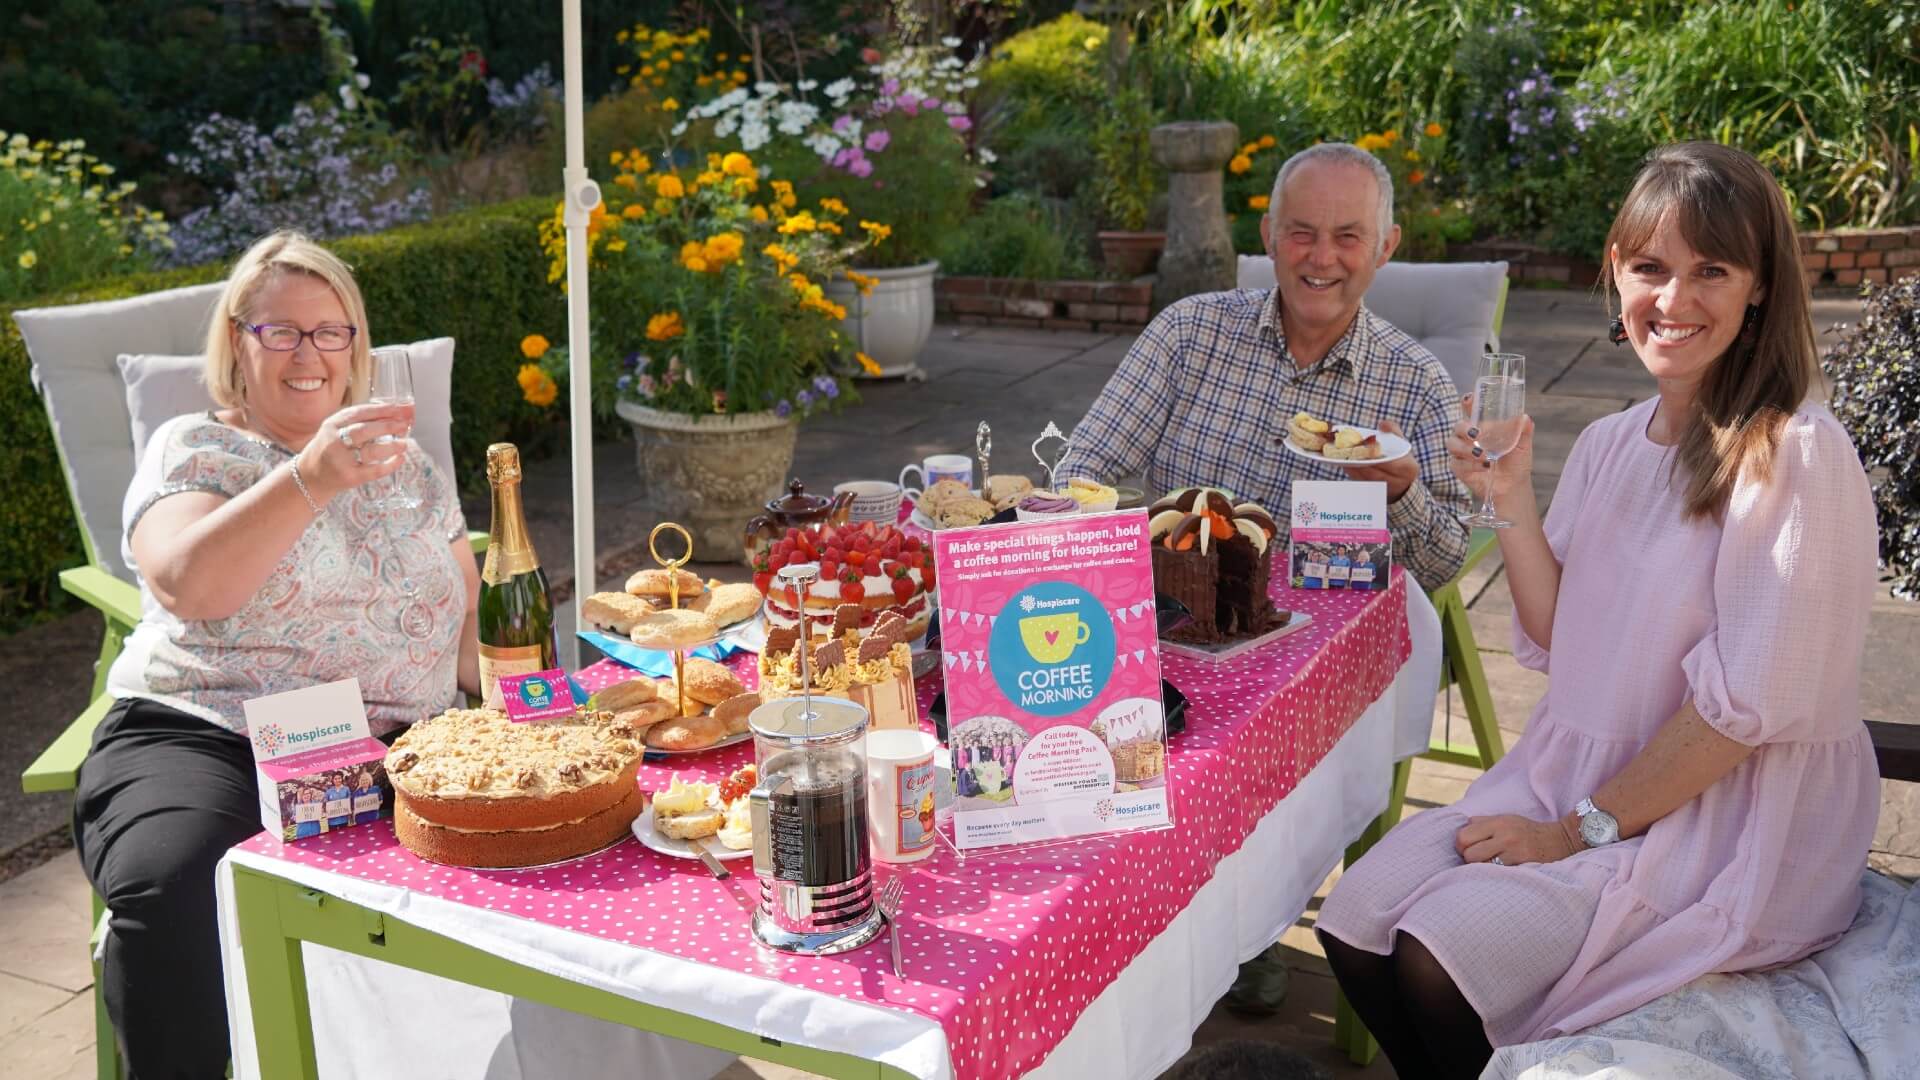 Hospiscare Coffee Morning: FAQs